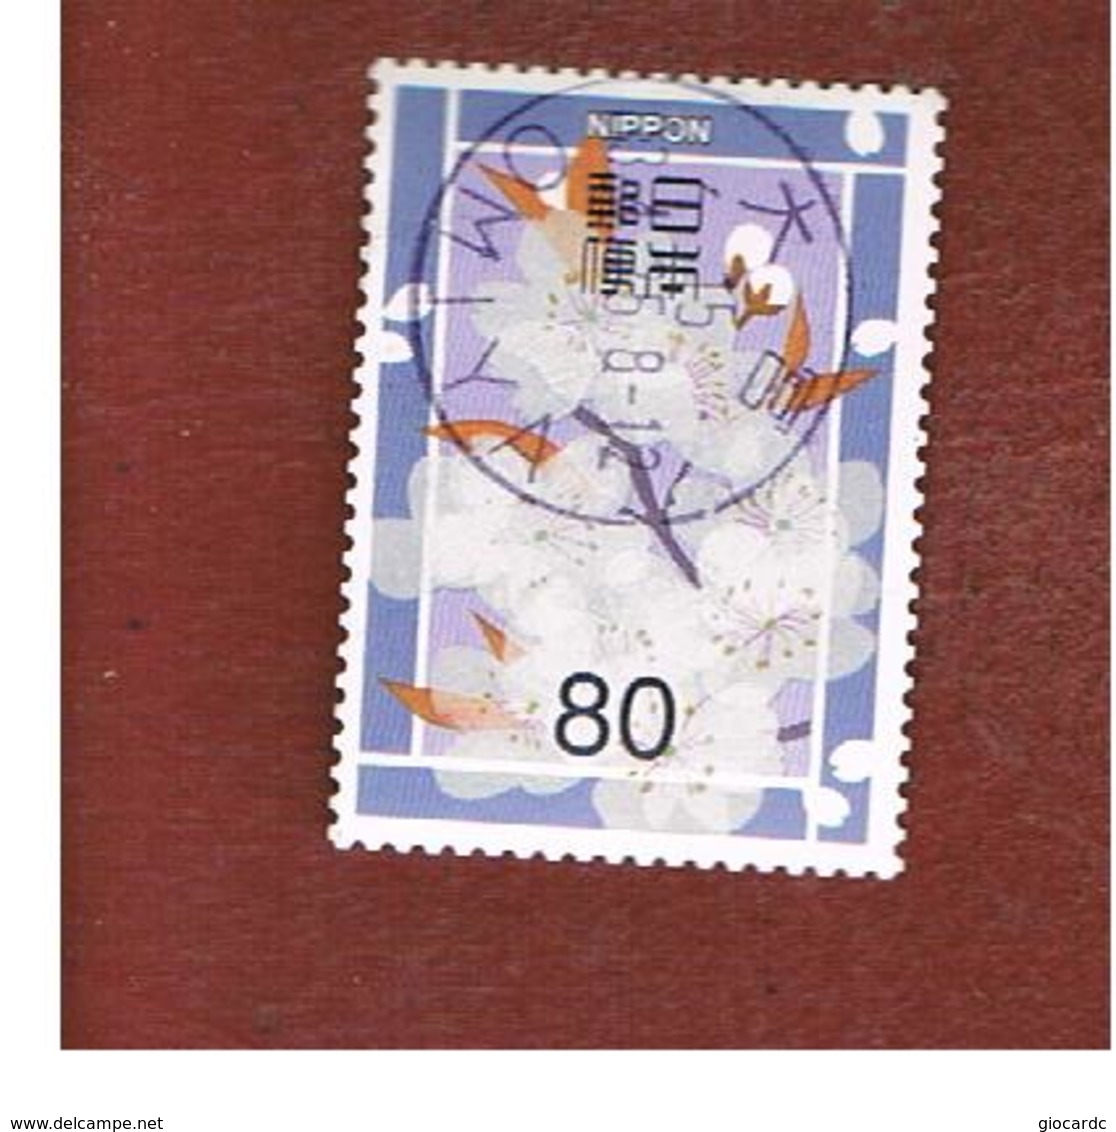 GIAPPONE (JAPAN) - SG 3106  -    2003  GREETINGS STAMPS: FULL BLOOM   - USED° - Oblitérés